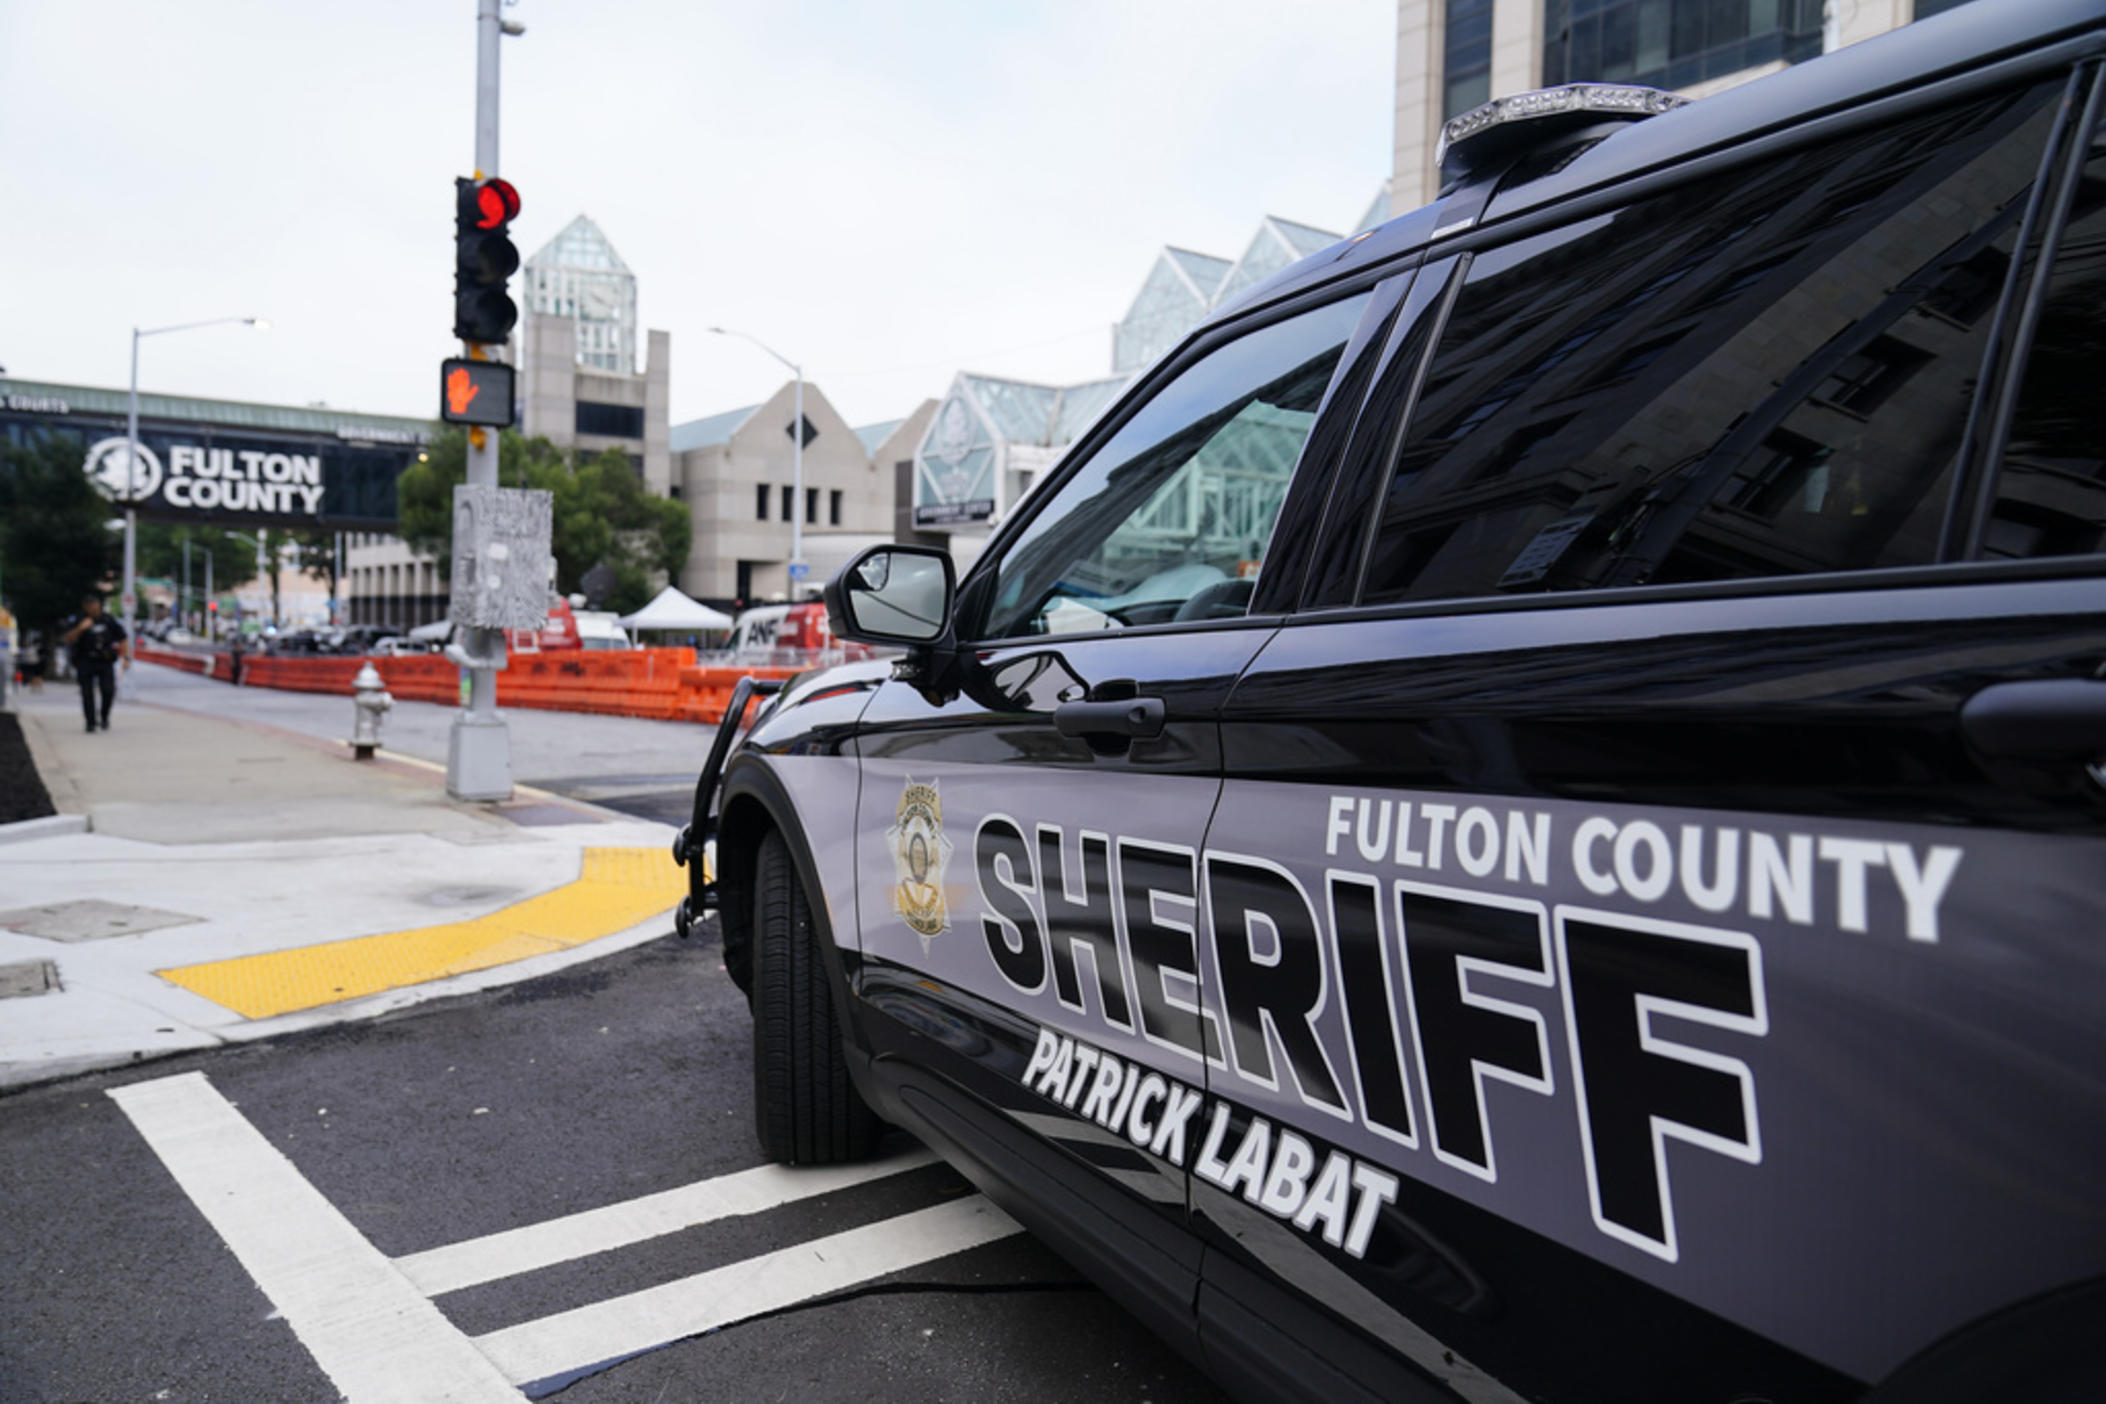 Barricades are seen near the Fulton County courthouse, Monday, Aug. 7, 2023, in Atlanta. The sheriff's office are implementing various security measures ahead of District Attorney Fani Willis possibly seeking an indictment in her investigation into whether former President Donald Trump and his allies illegally meddled in the 2020 election in Georgia. 